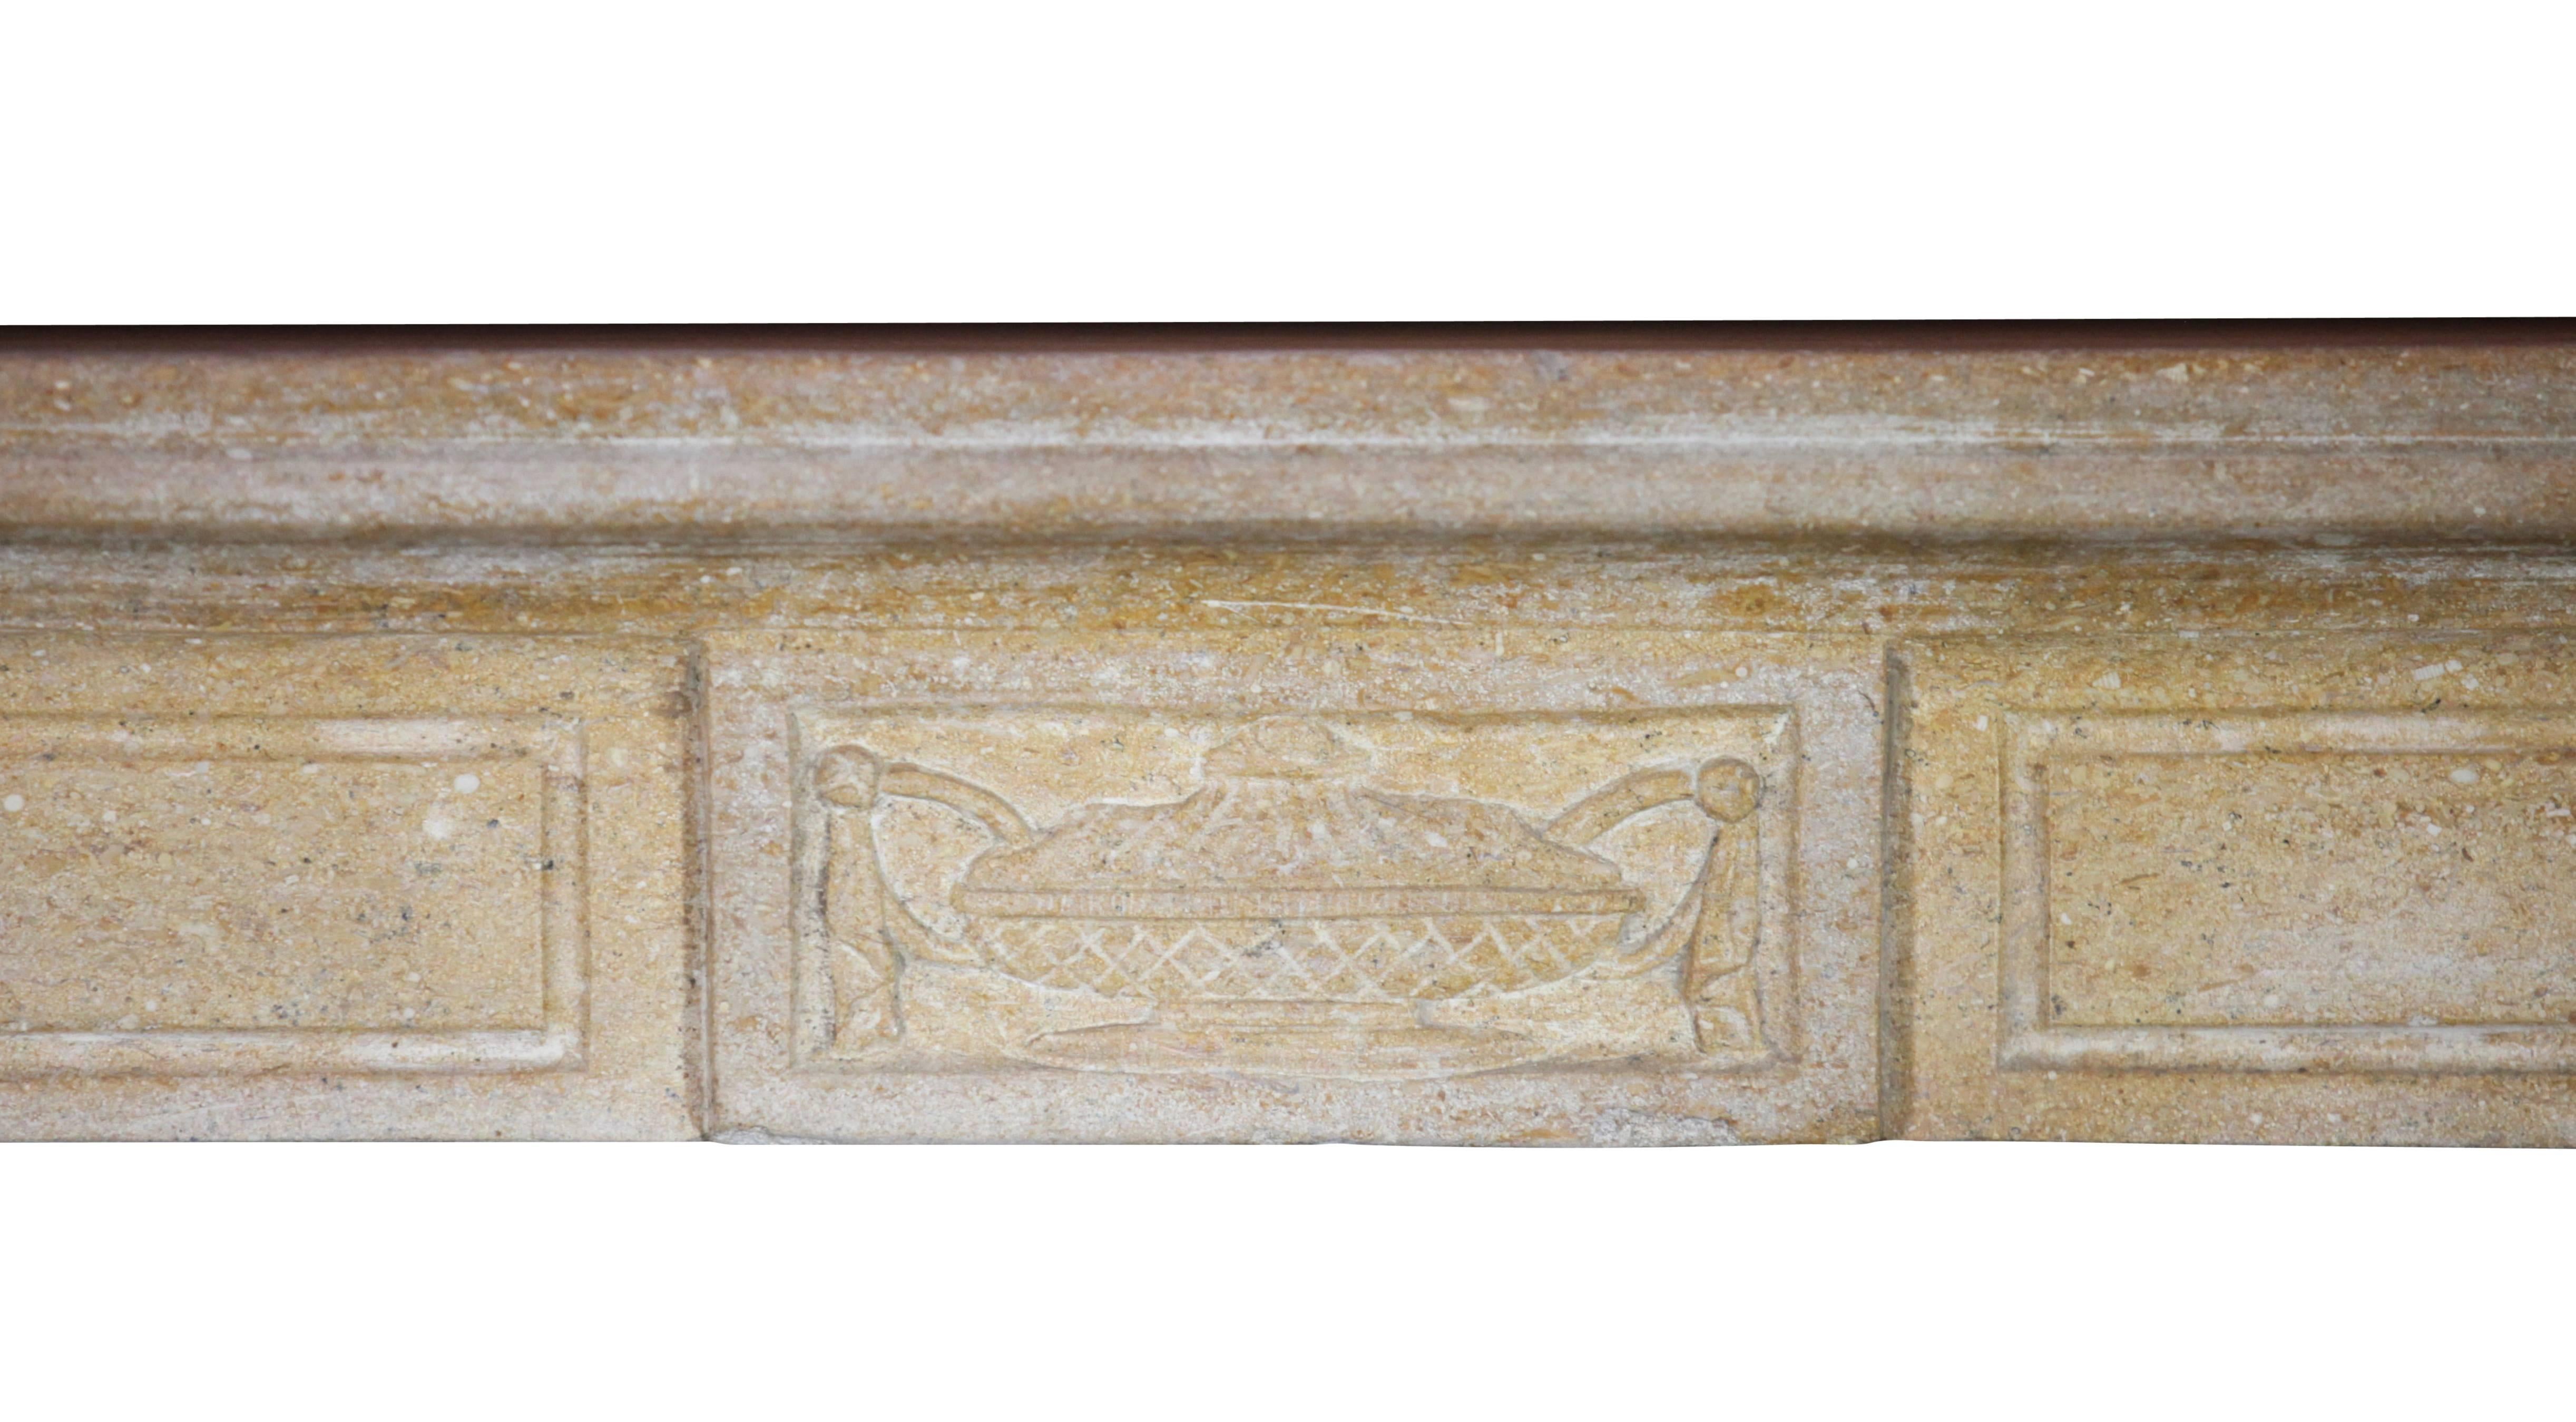 This is an original antique fireplace surround in burgundy hard stone with remains of the original wax. This was built in the Directoire period.

Measures:
126 cm EW 49,60".
107 cm EH 42,13".
101 cm IW 39,76".
96 cm IH